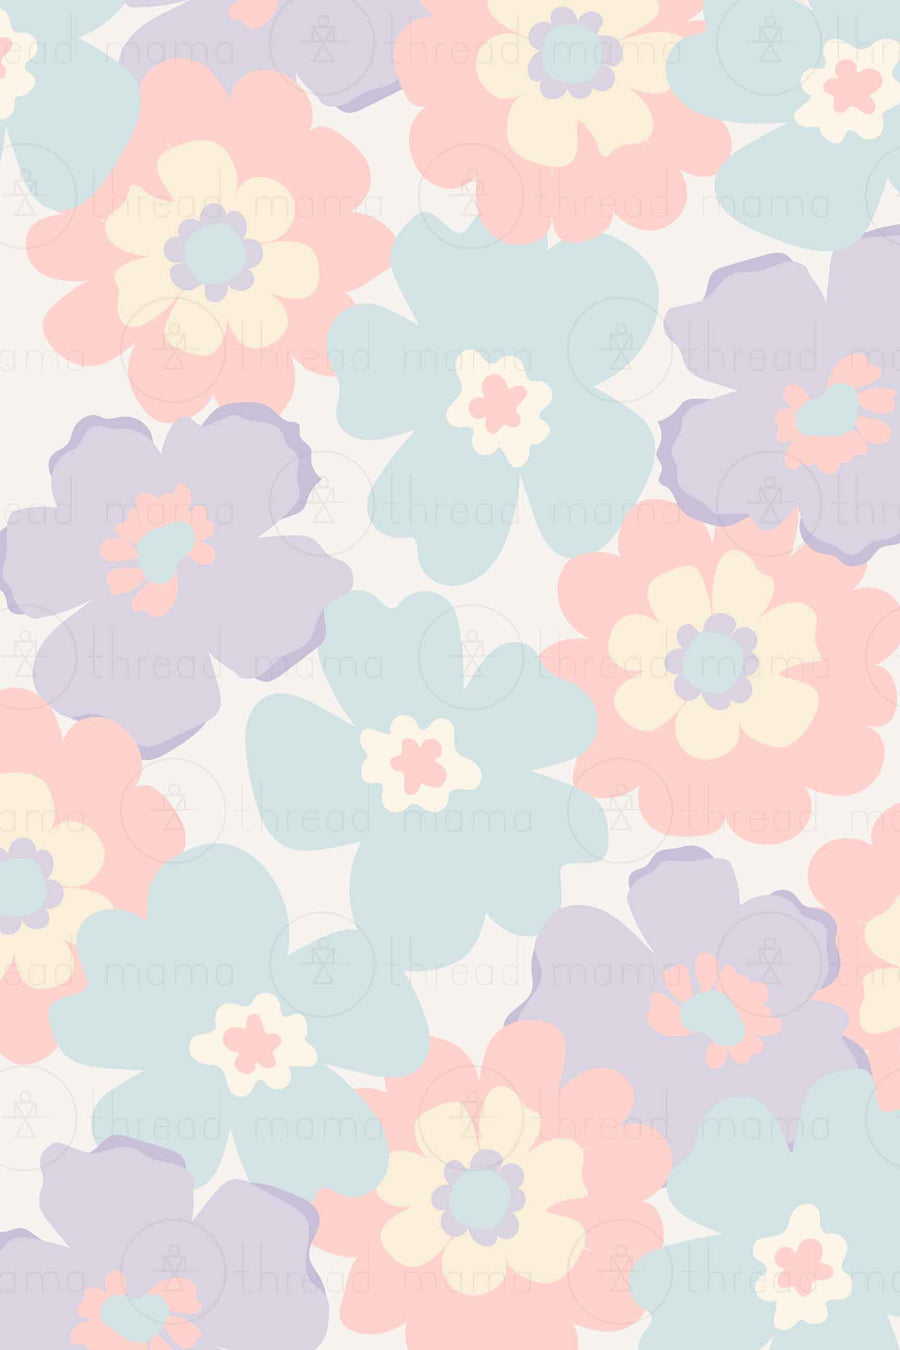 Repeating Pattern 49 (Seamless)